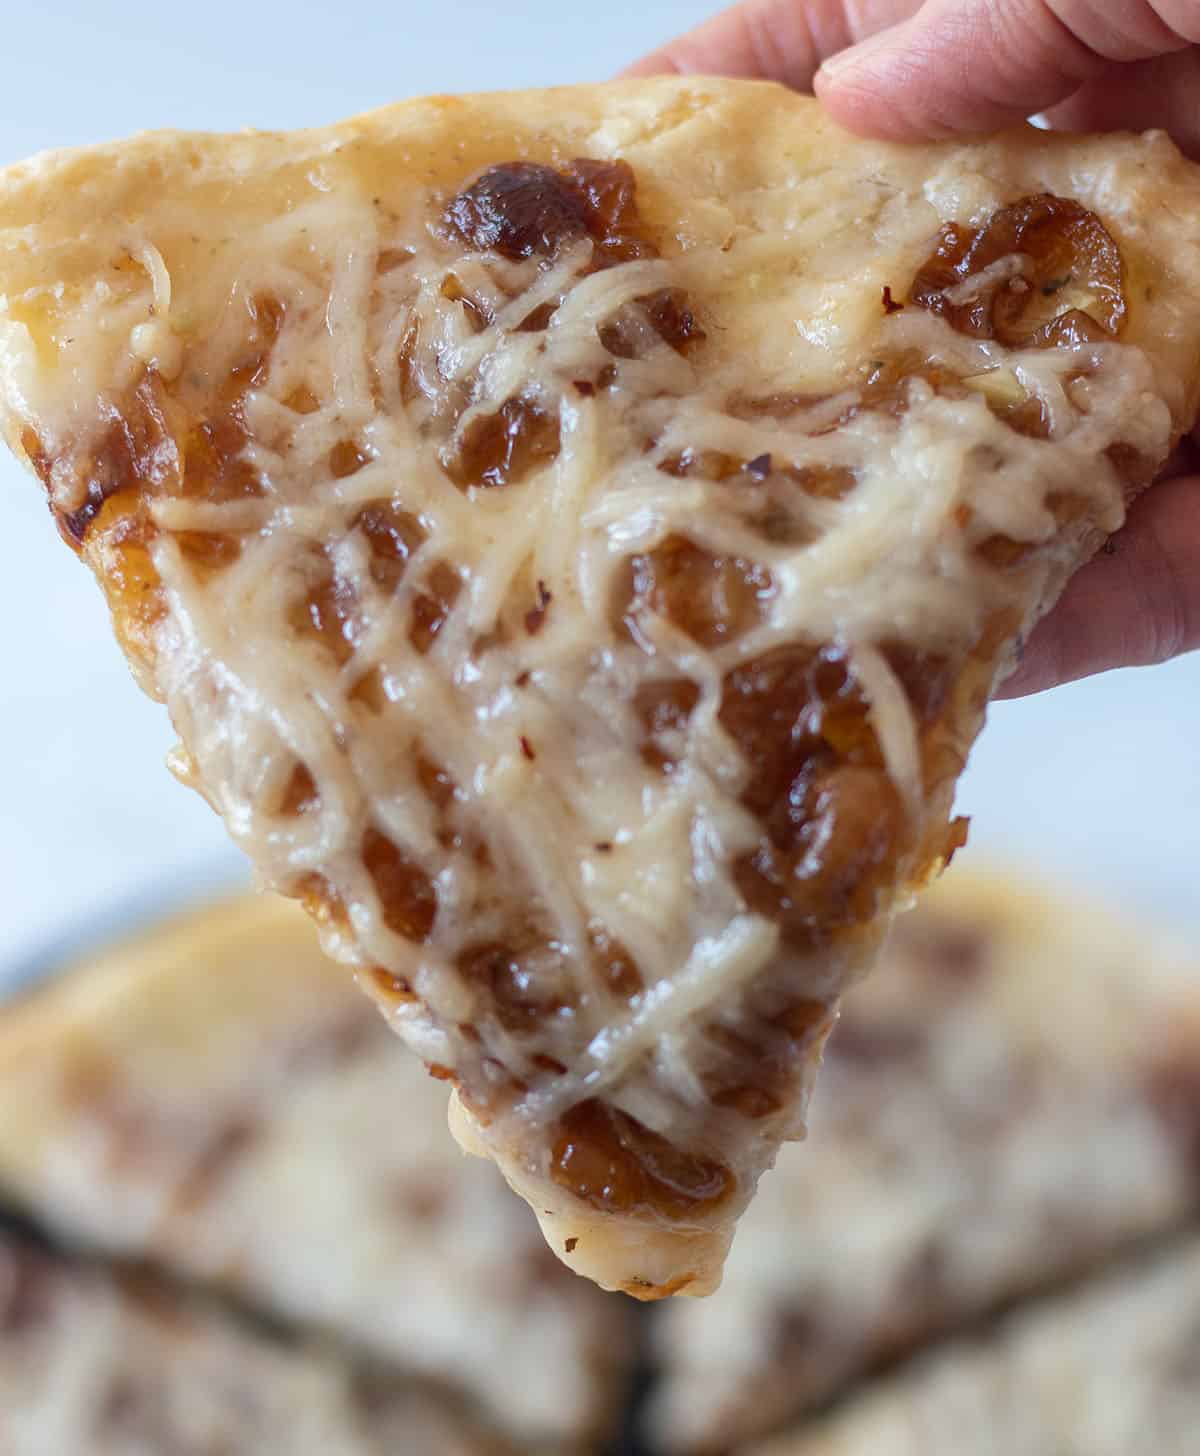 holding a slice of caramelized onion pizza in hand.